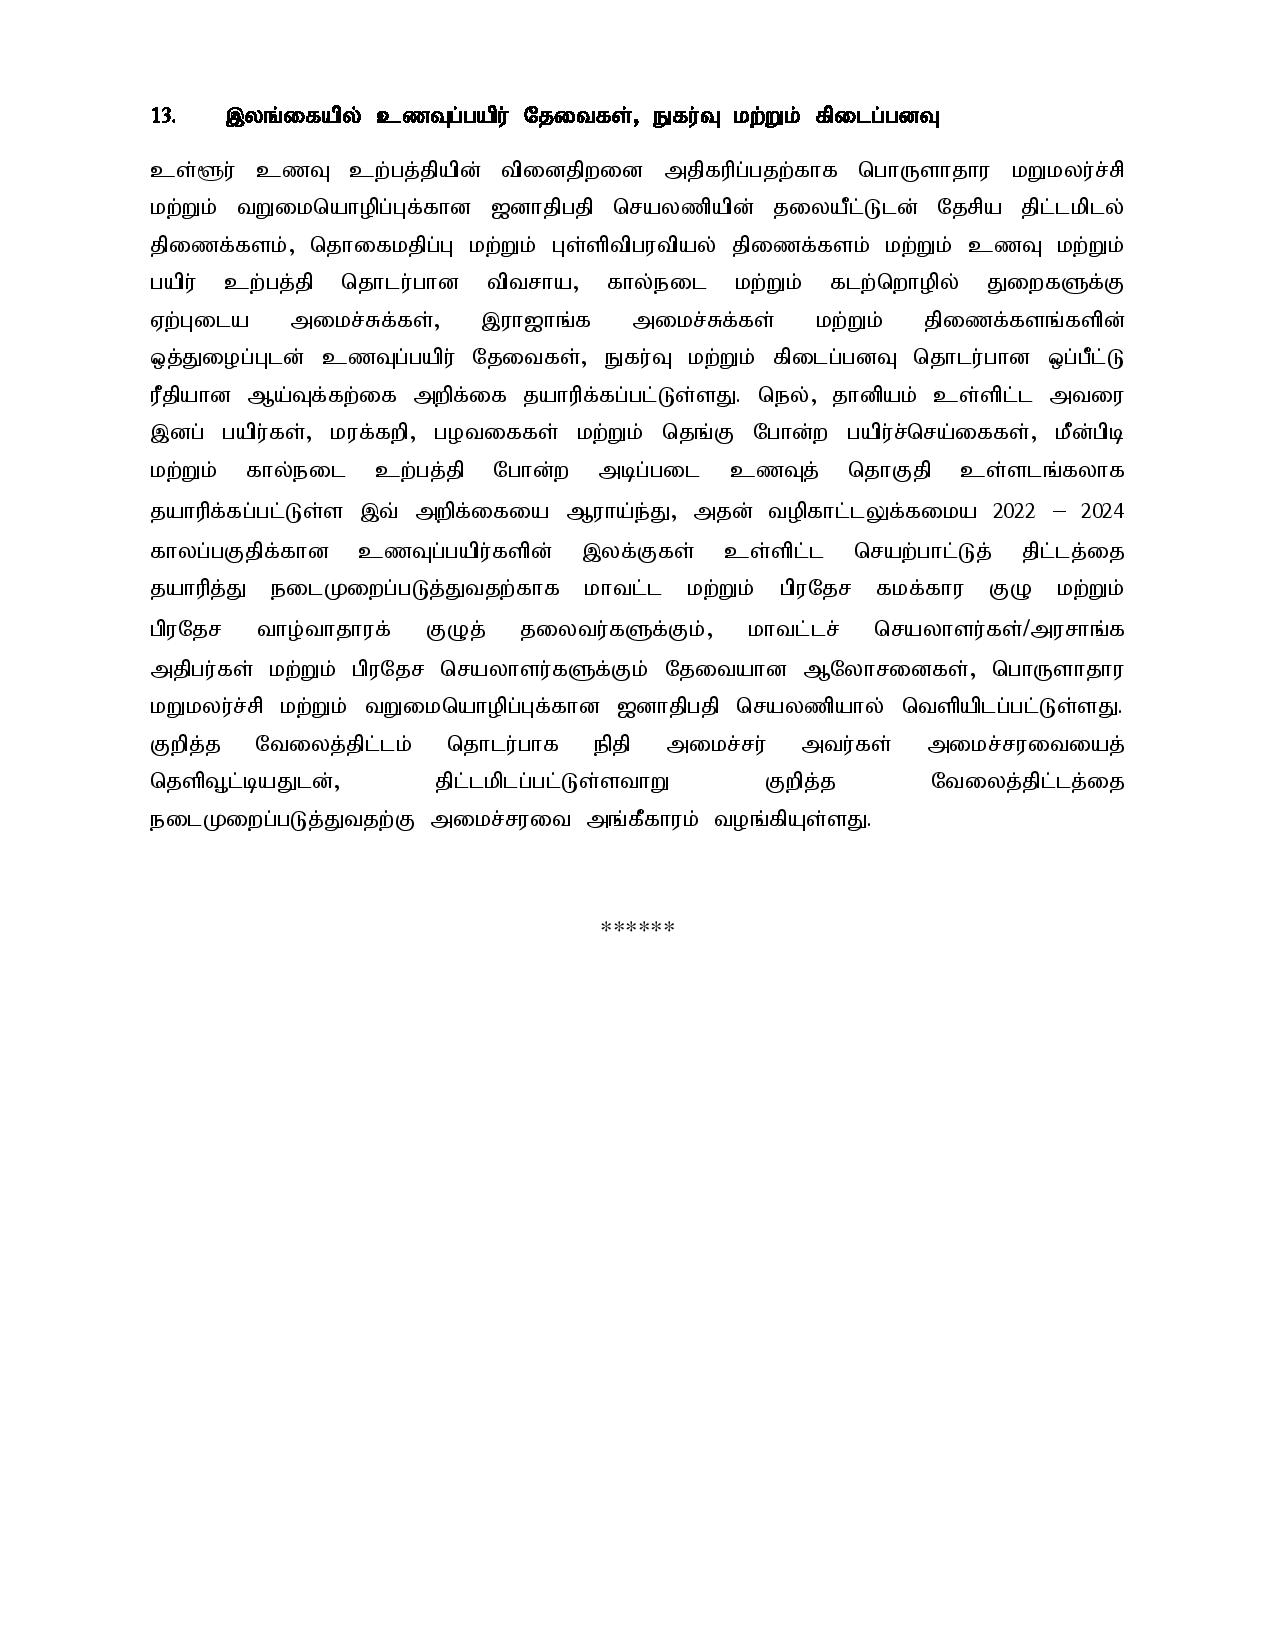 Cabinet 18.10.2021 Tamil page 007